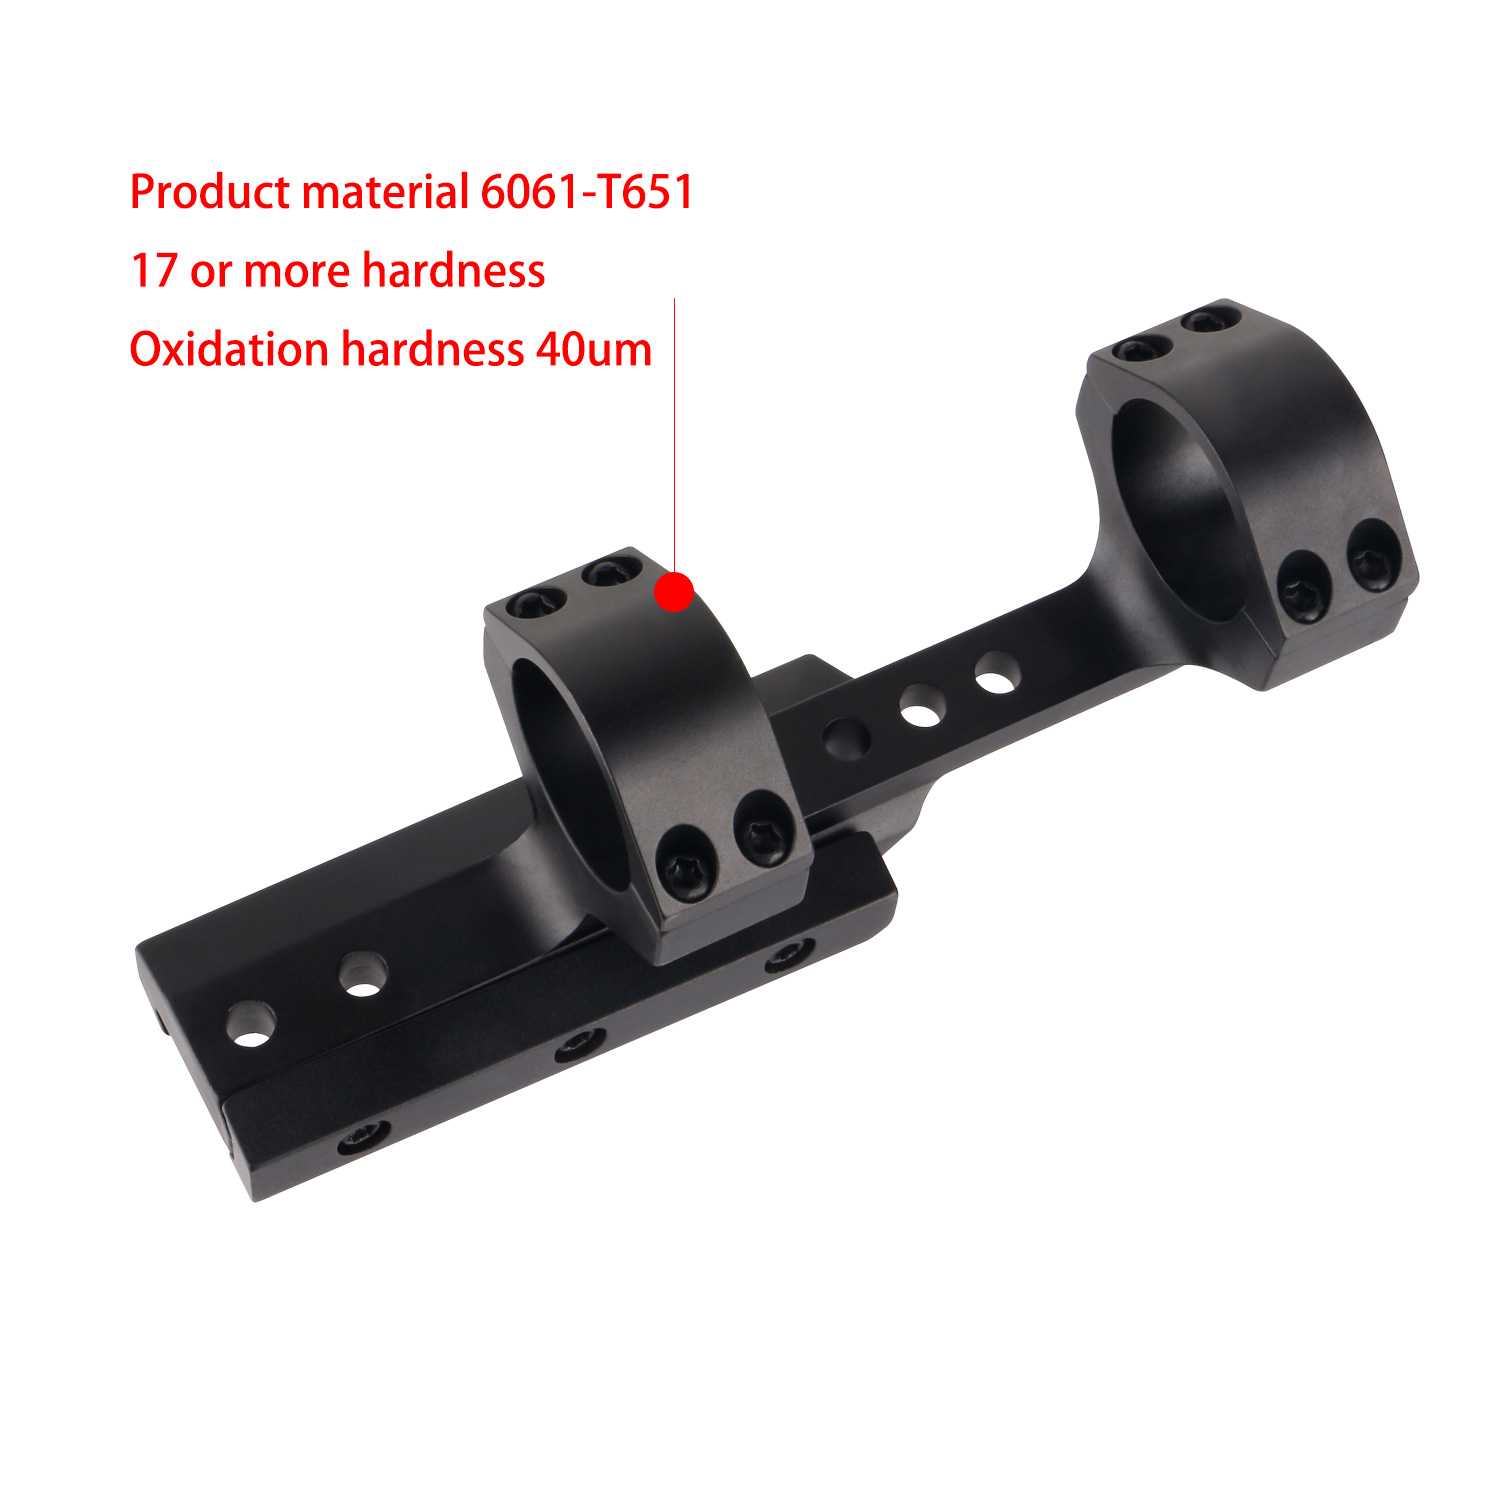 One-Piece 30mm Cantilever Scope Mount